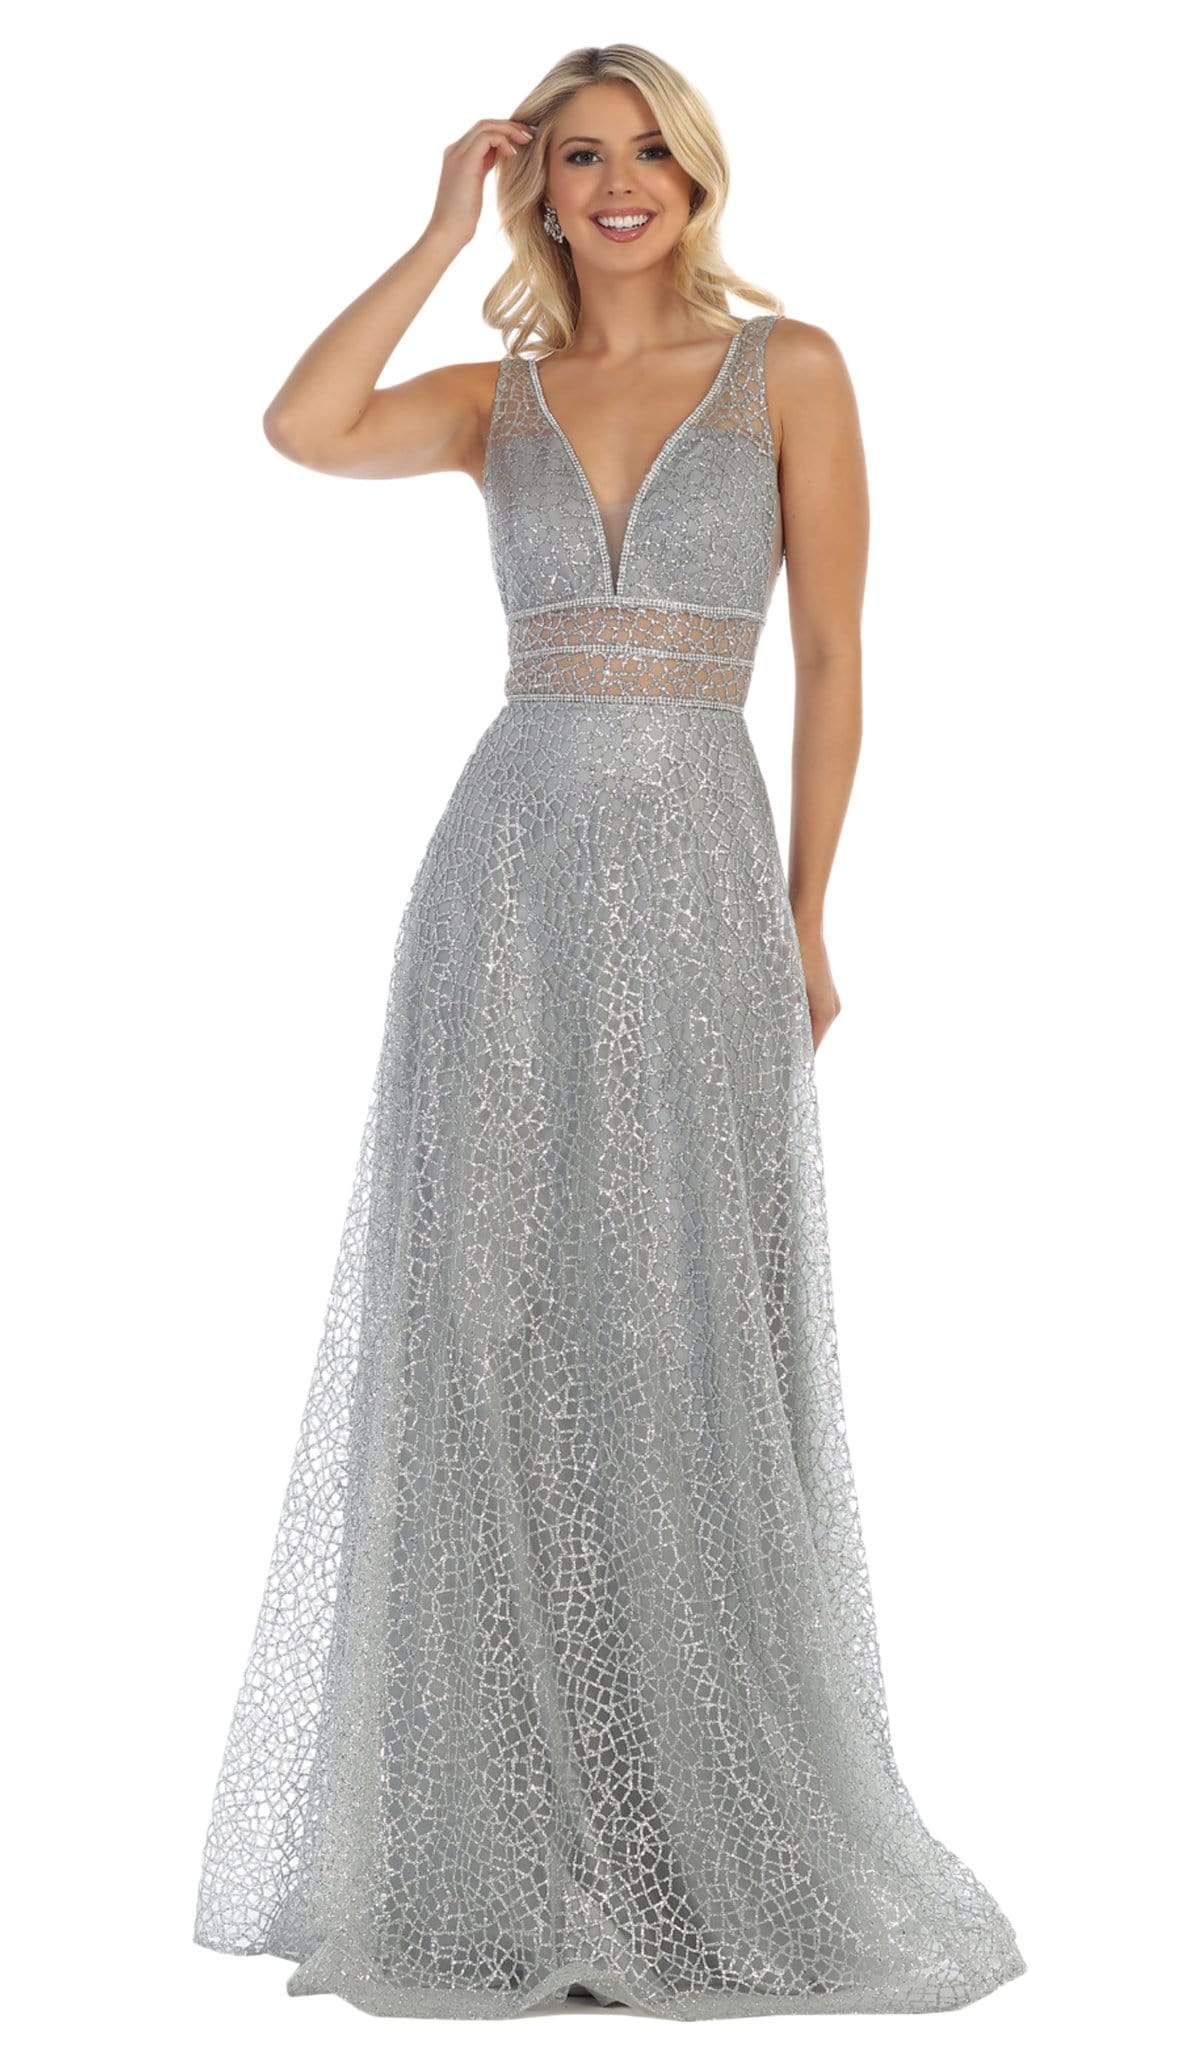 May Queen - MQ-1623 Sleeveless V-Neck Glitter Tulle A-Line Gown Special Occasion Dress 2 / Silver